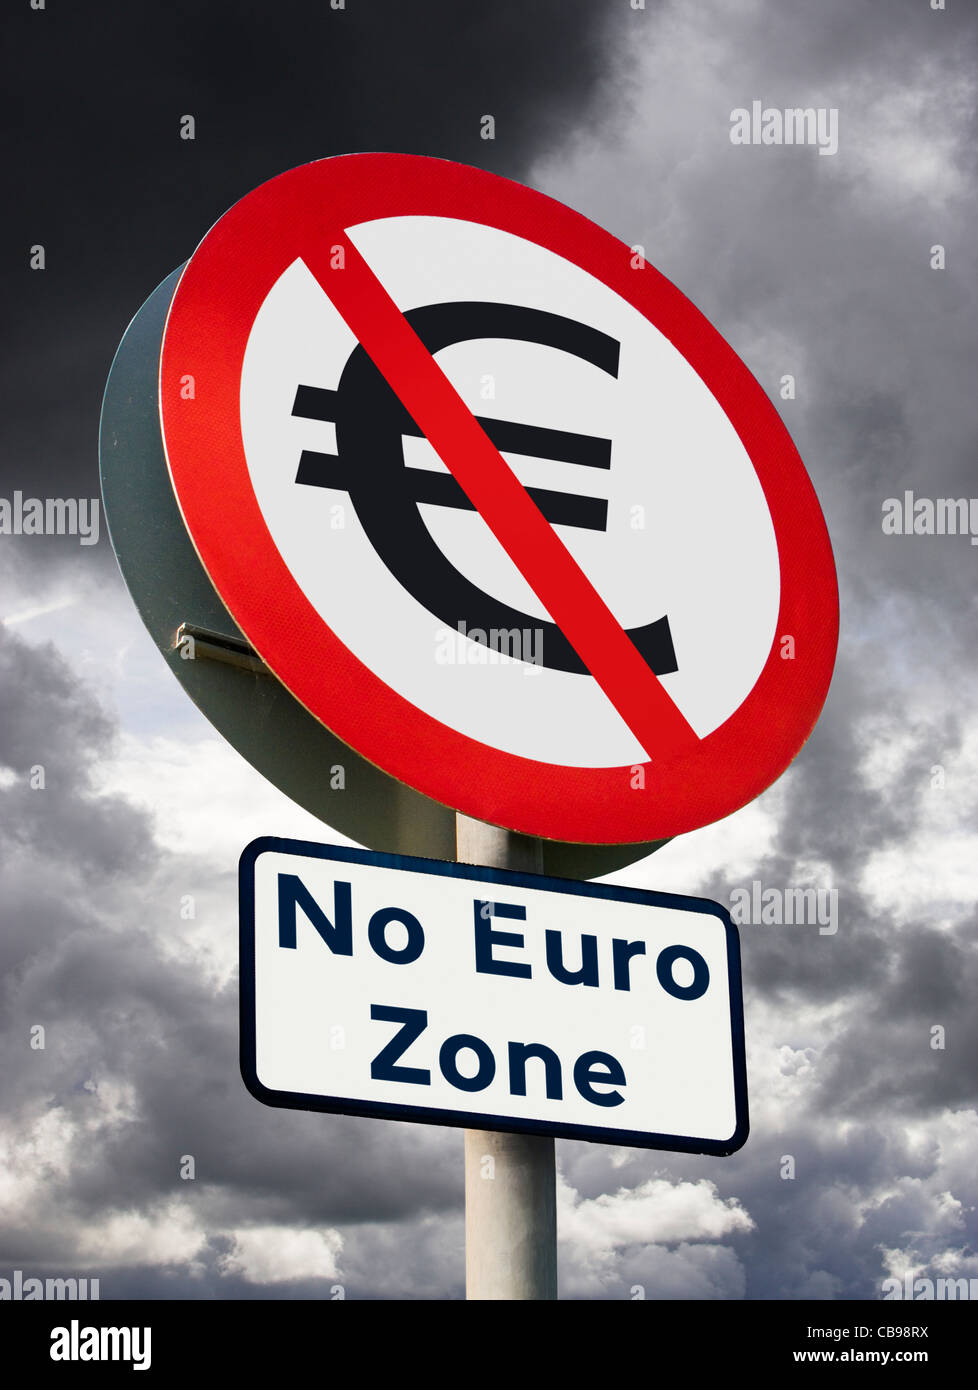 End of the Eurozone or euro currency area break up concept against a stormy sky Stock Photo